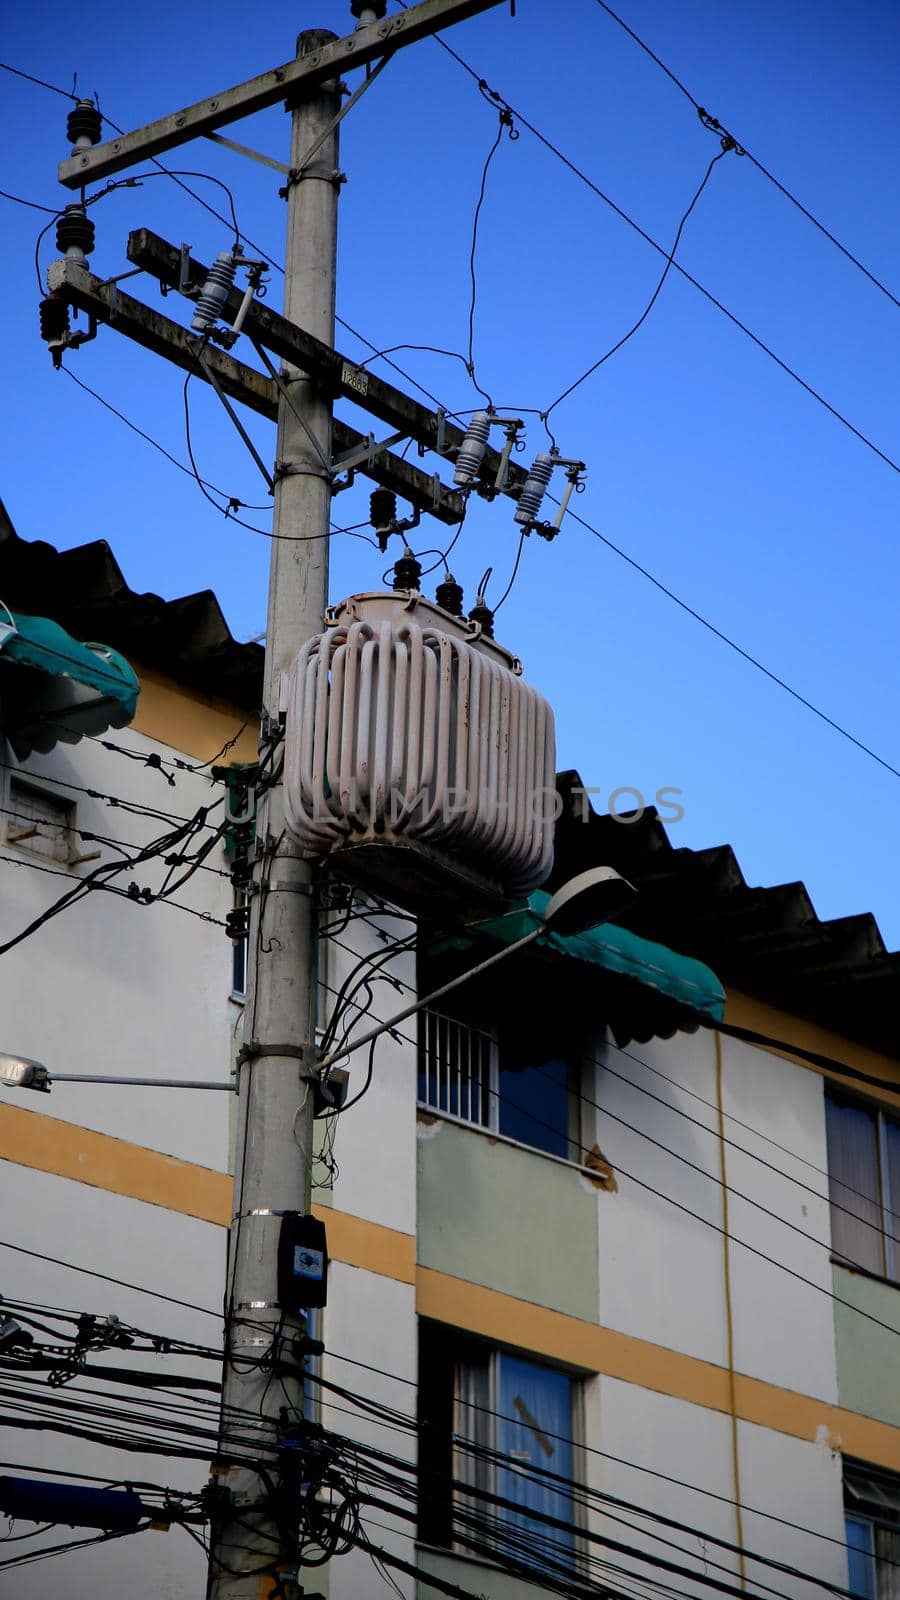 salvador, bahia / brazil - july 4, 2020: a transformer is seen on a grid post in the city of Salvador.